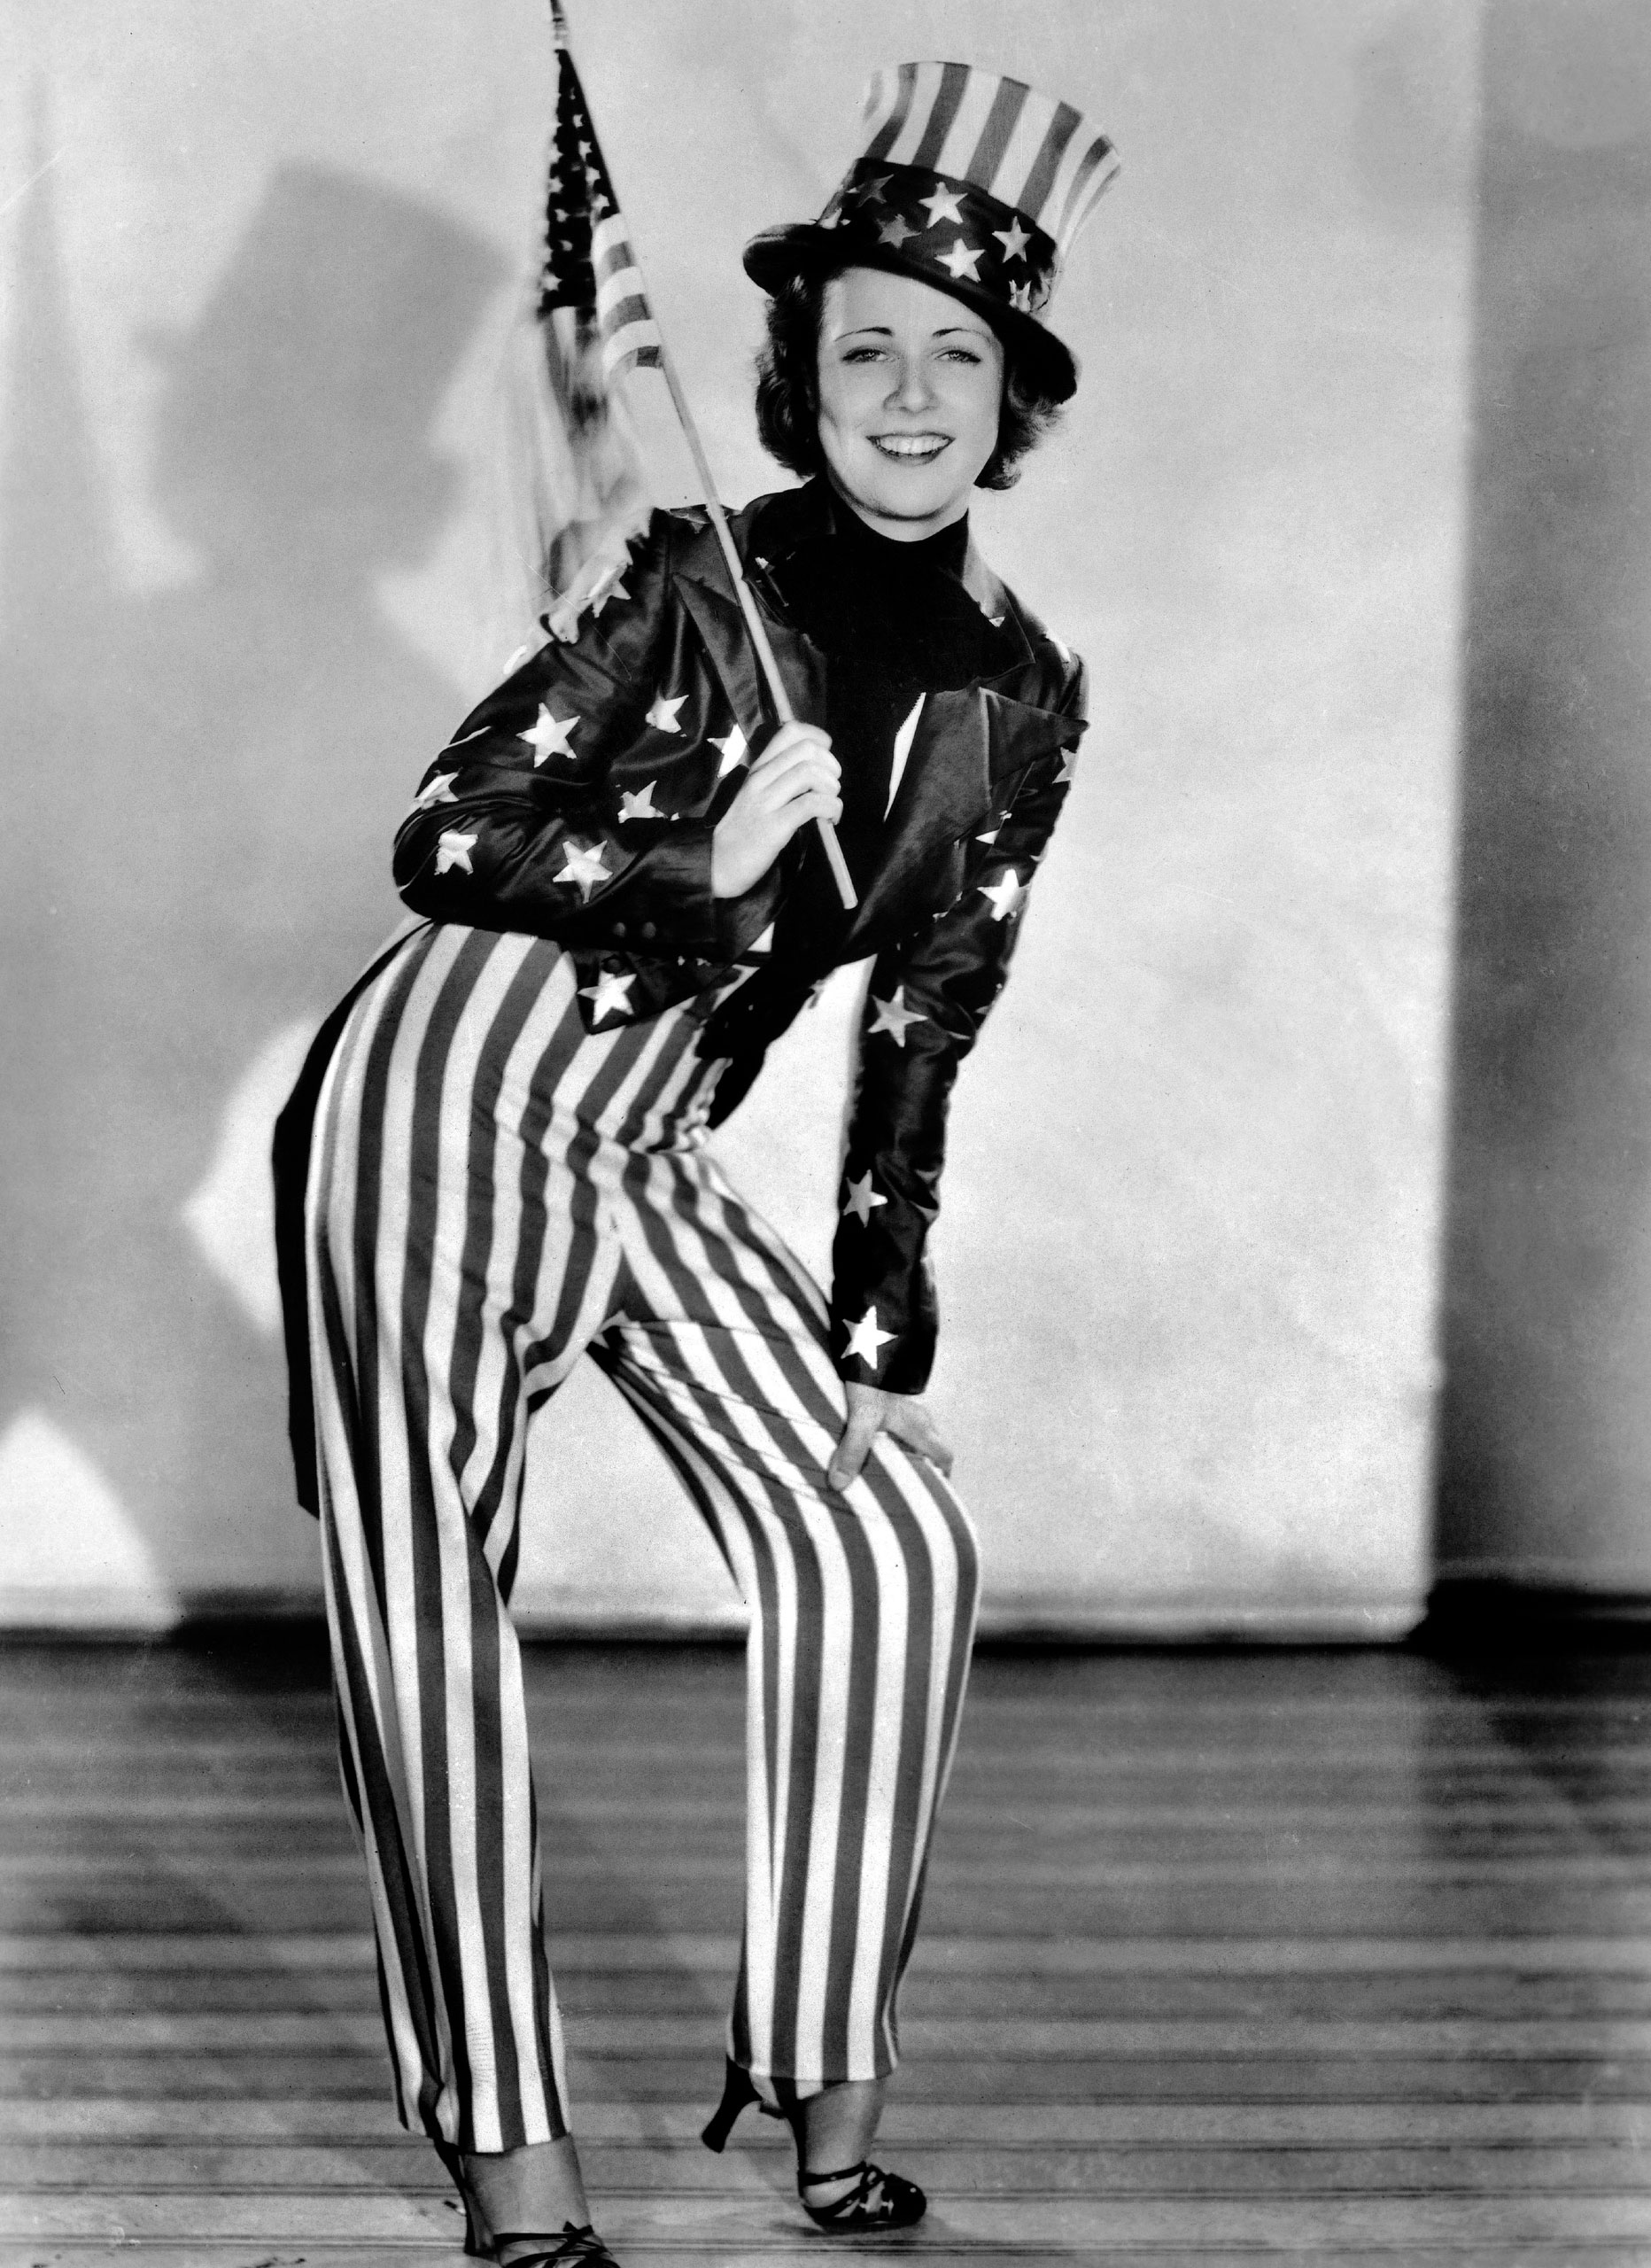 American Actress Gloria Shea rehearsing in New York to celebrate Independence Day on July 4, 1932.